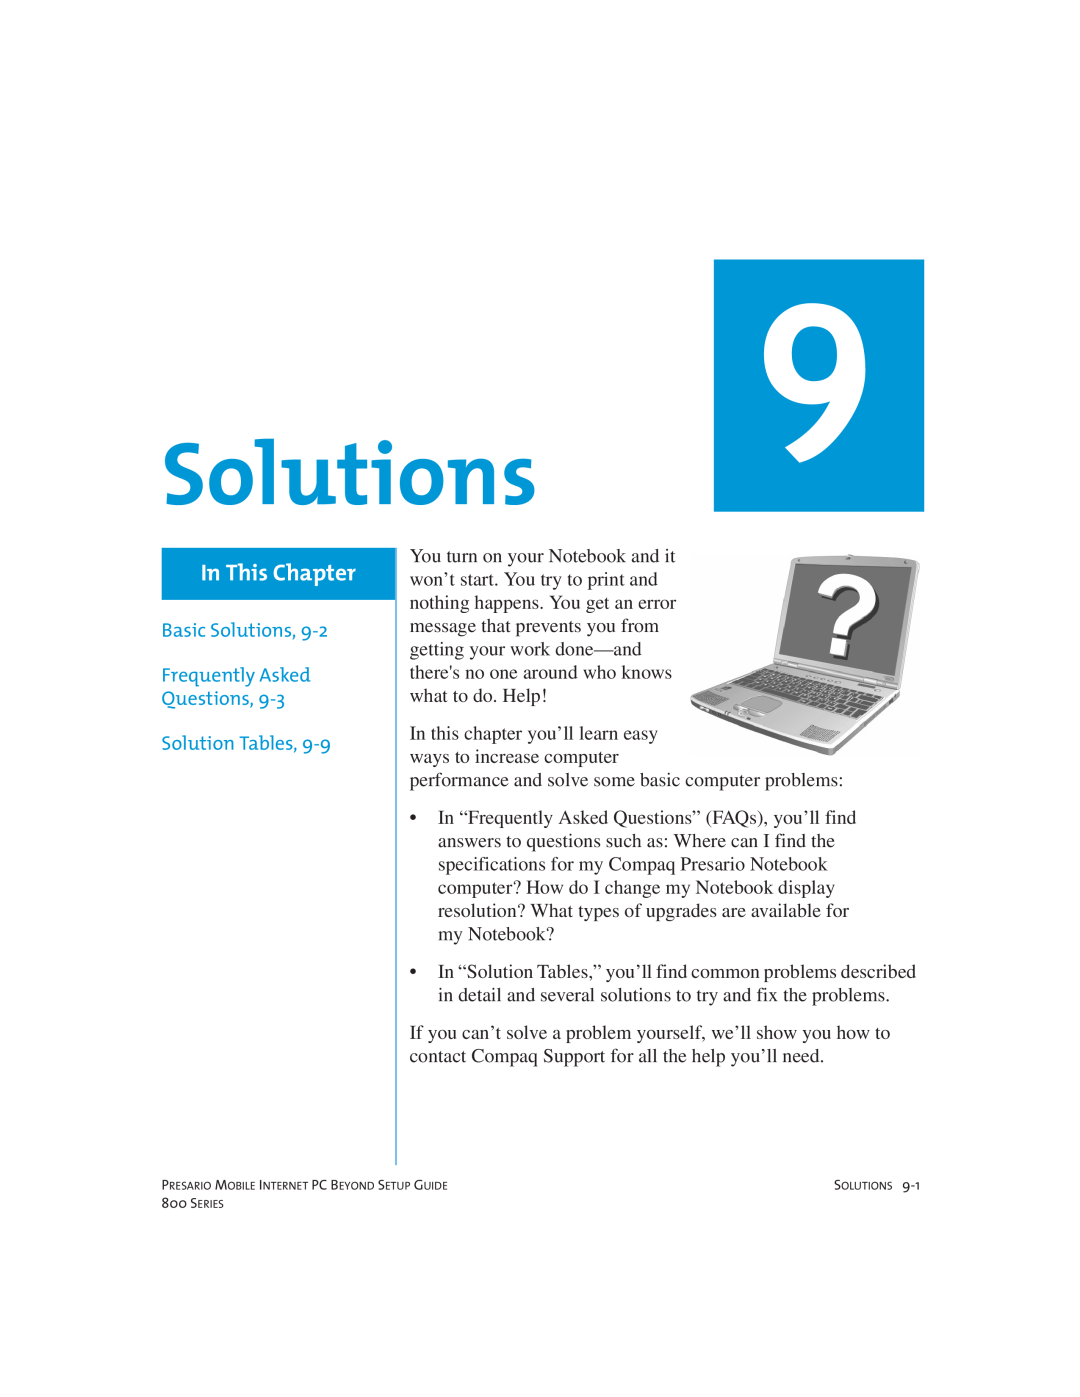 Compaq 800 manual In This Chapter, Basic Solutions, Frequently Asked Questions, Solution Tables 